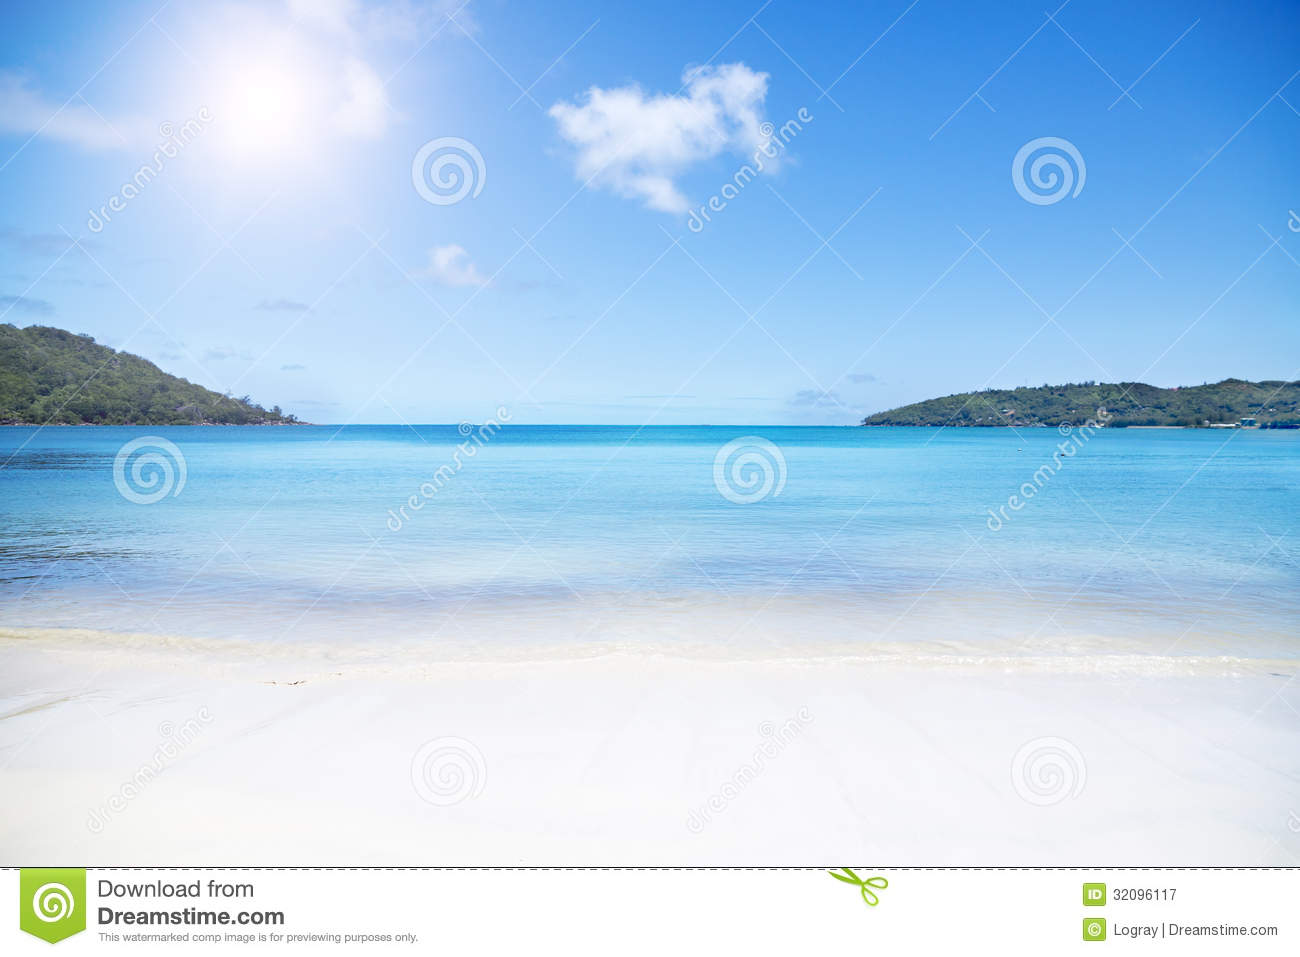 Island Of Dreams For A Rest And Relaxation  White Coral Beach Sand